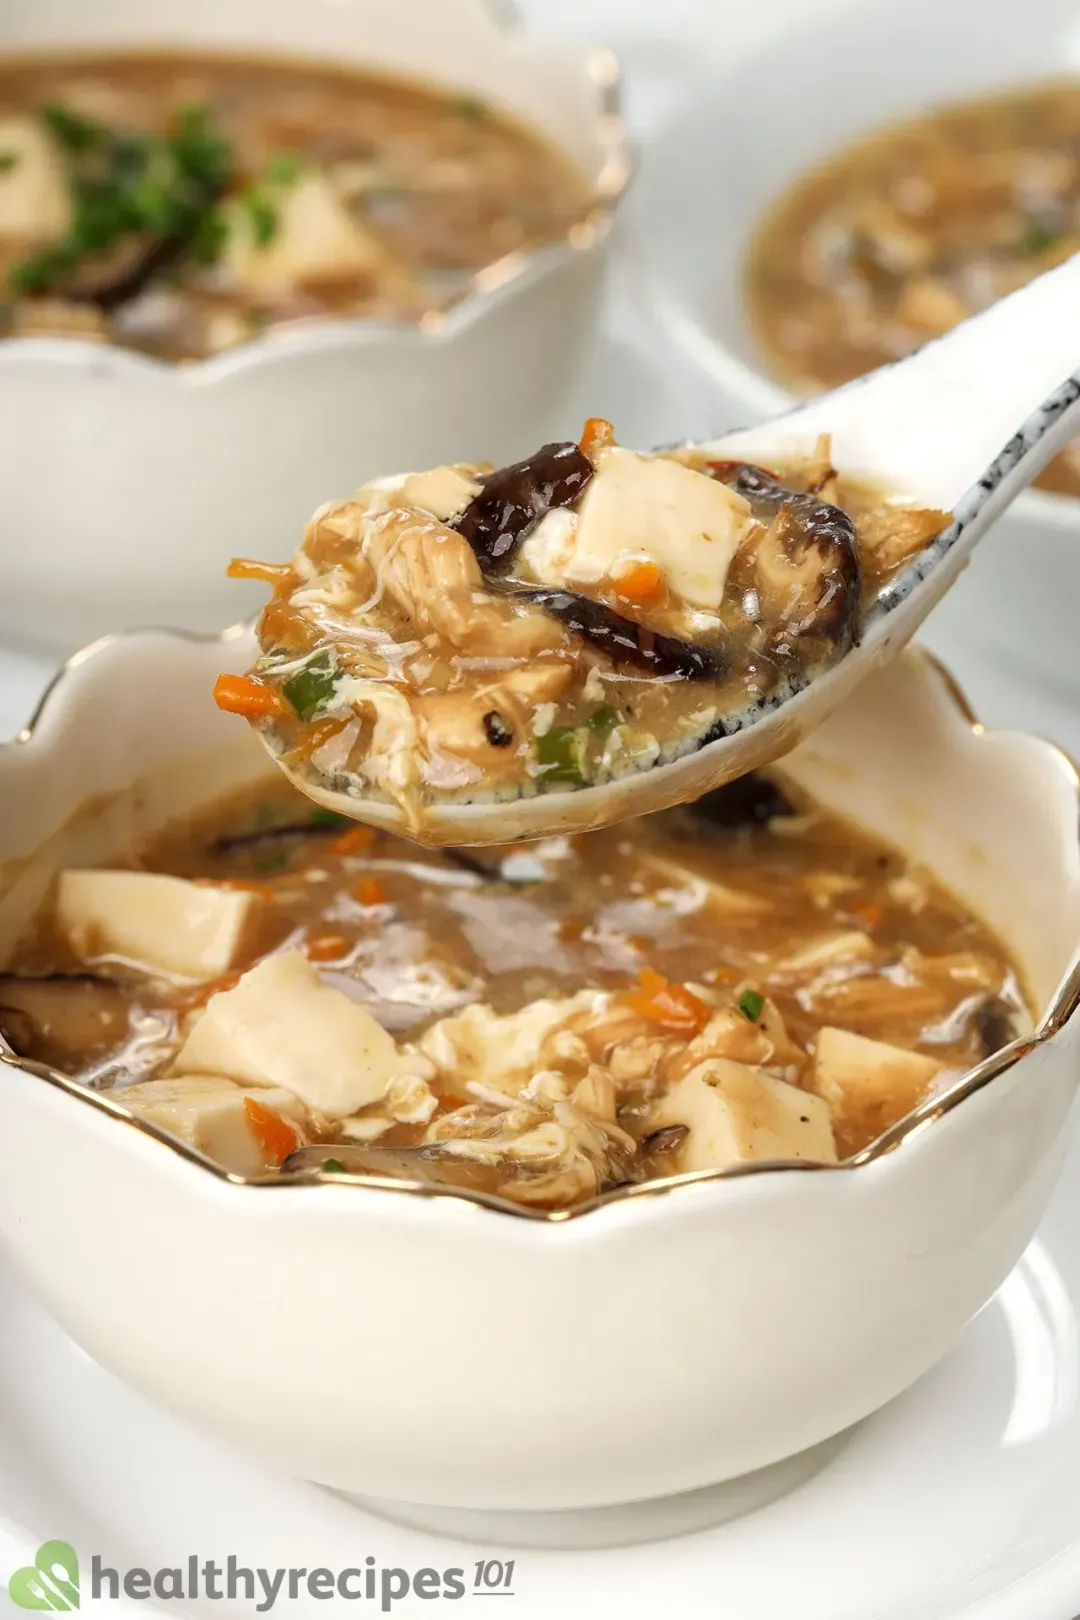 How Healthy Is Hot and Sour Soup